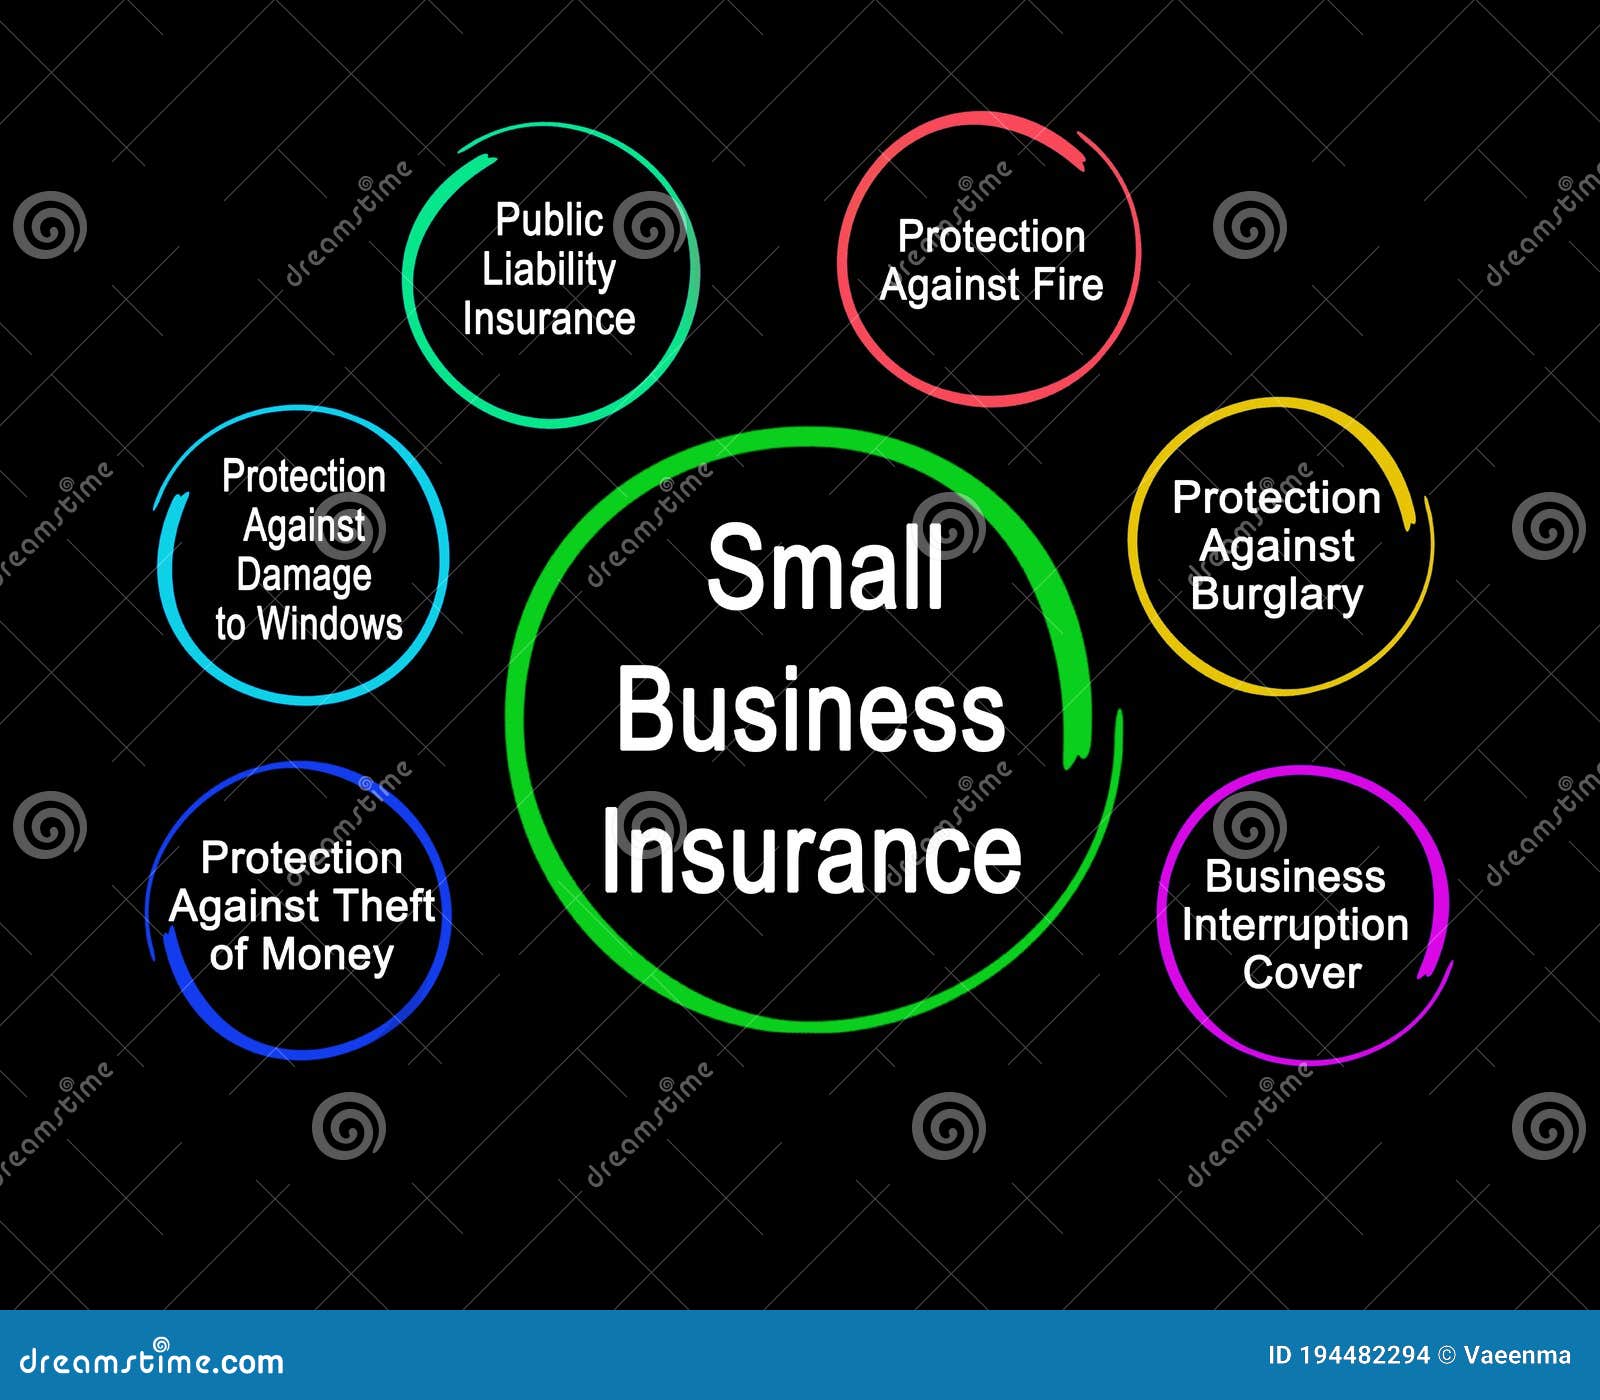 Types of Small Business Insurance Stock Photo Image of commerce